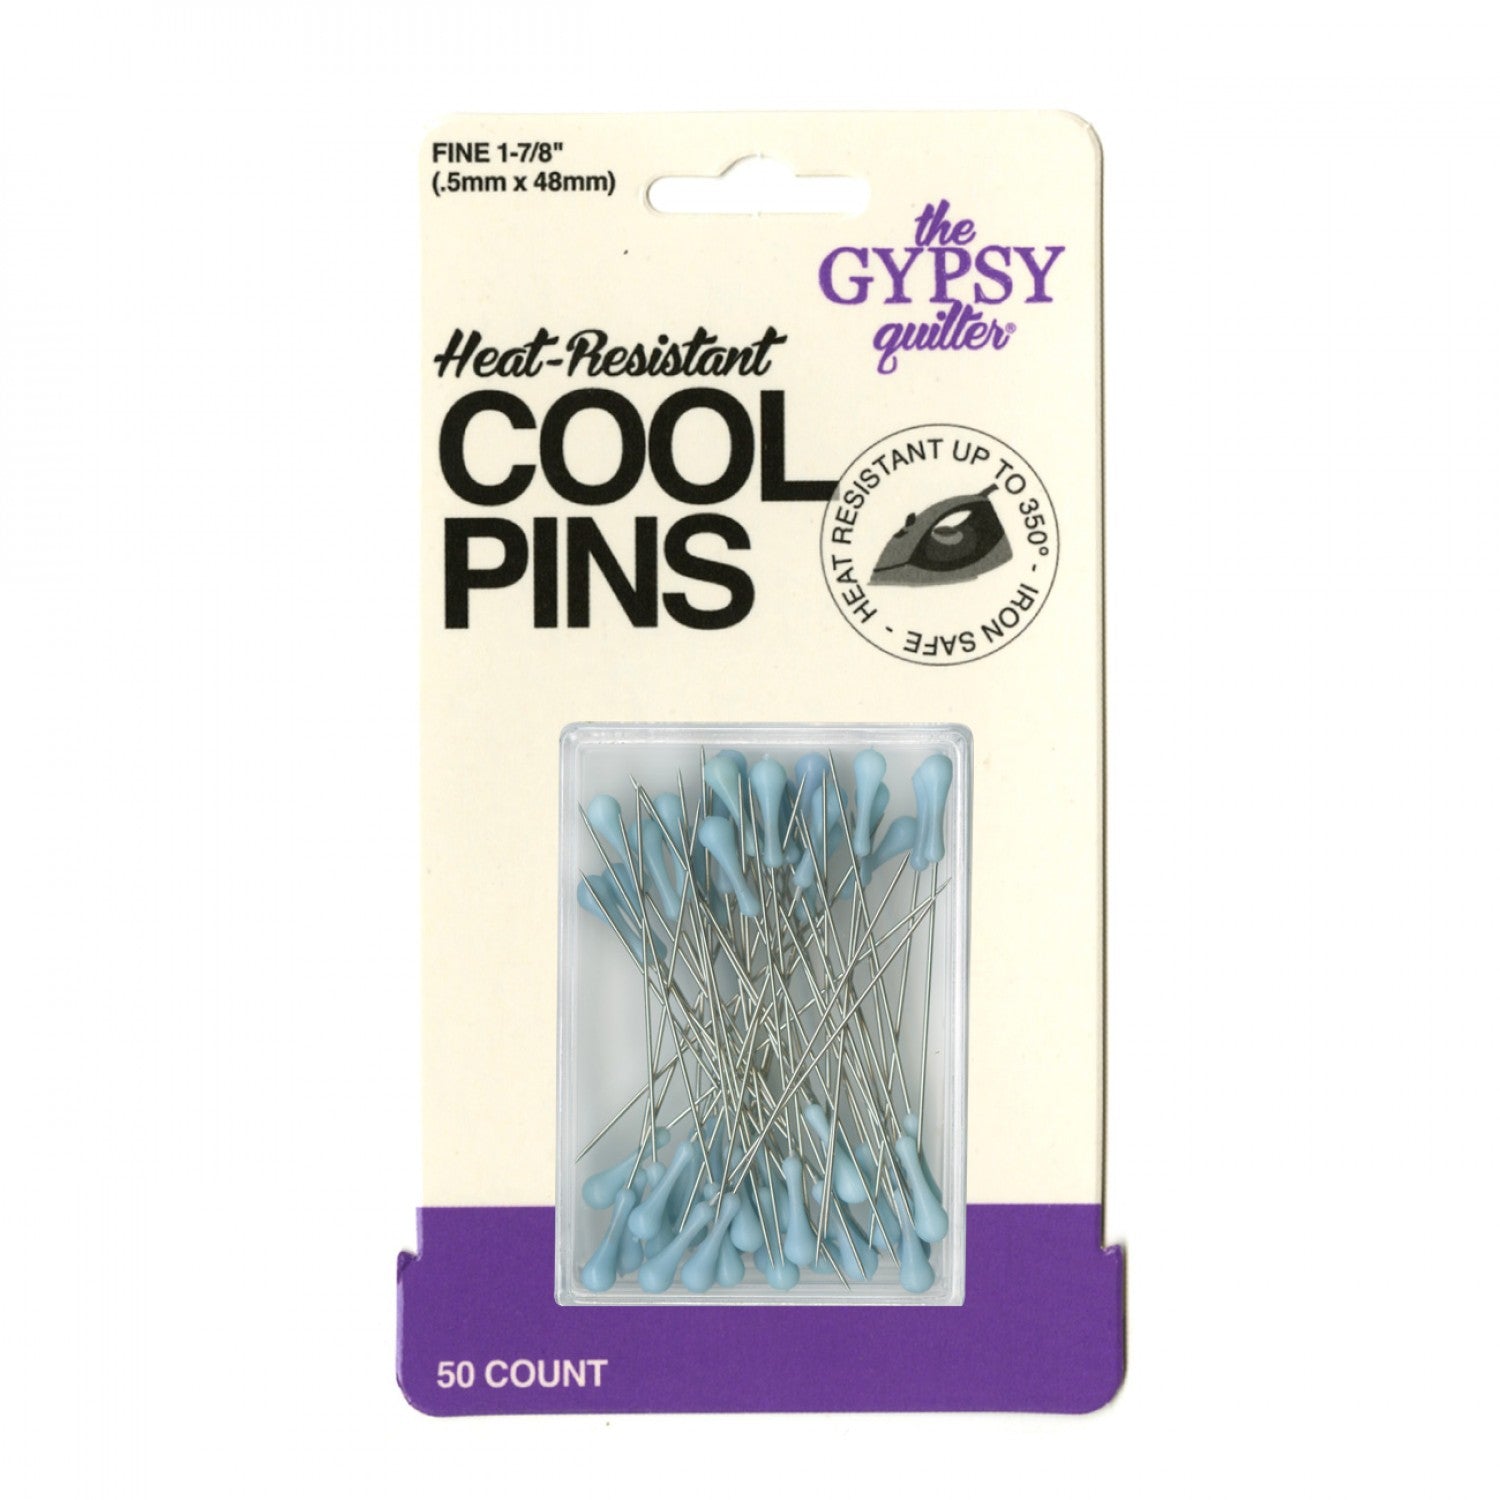 Cool pins are just that - COOL! They are heat resistant up to 350 degrees Fahrenheit so you can iron over them without melting the tip of the pin or burning your finger. The large pinheads are easy to grasp and manipulate - perfect for all ages. And since the tips of the Cool Pins are colorful, they are easy to spot and remove - no pins left behind. Cool pins are sharp and fine. At just .5 mm, they will not leave holes in your finished project. 50 pins come in a reusable storage box.